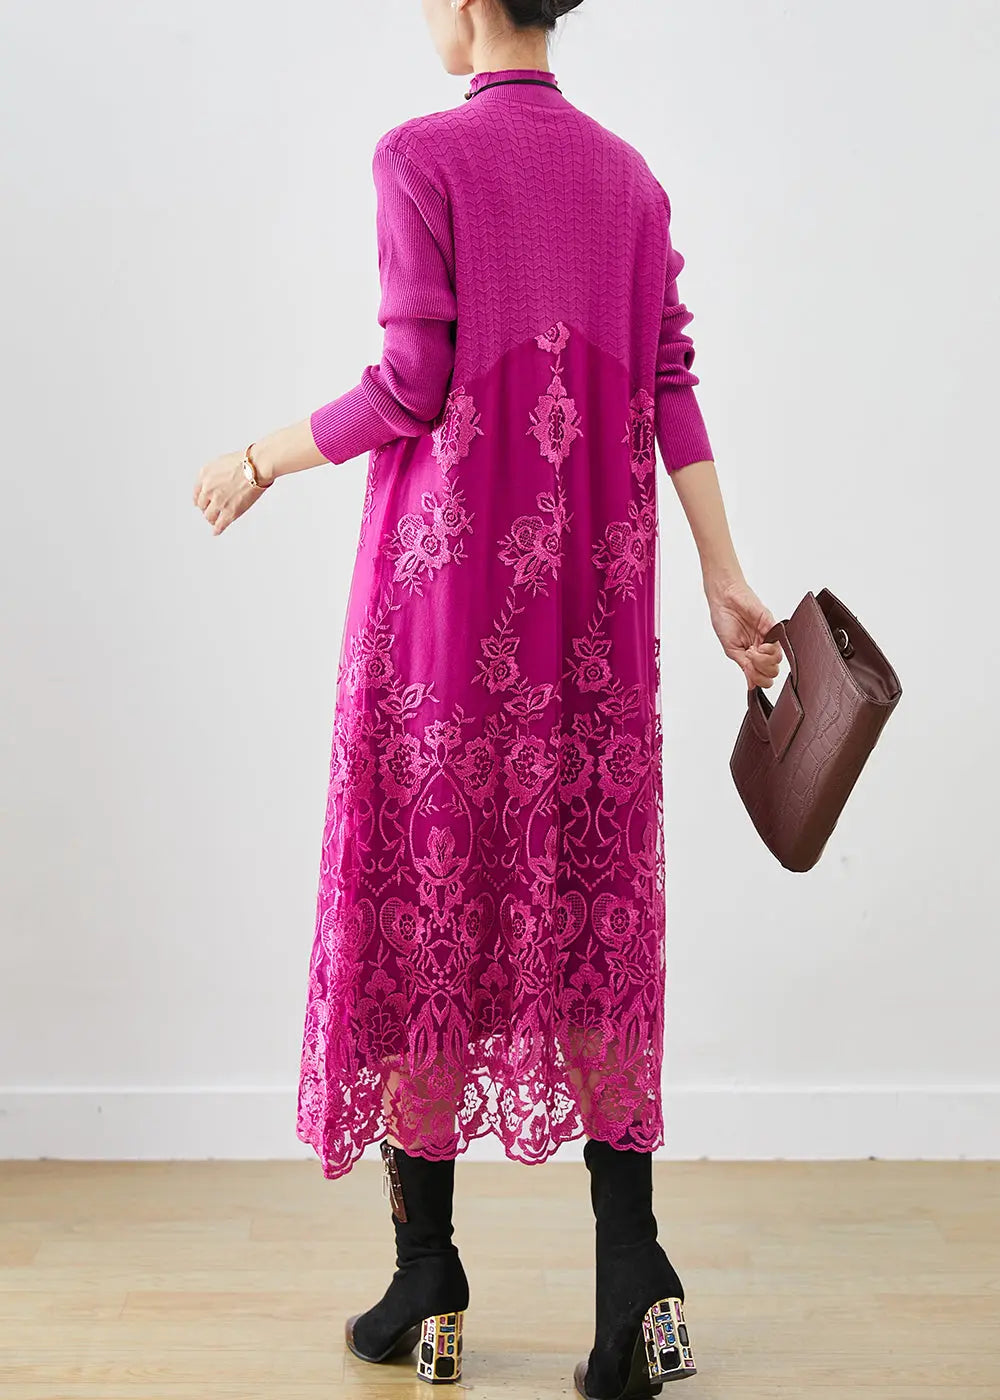 Rose Patchwork Knit Robe Dresses Embroideried Fall Ada Fashion